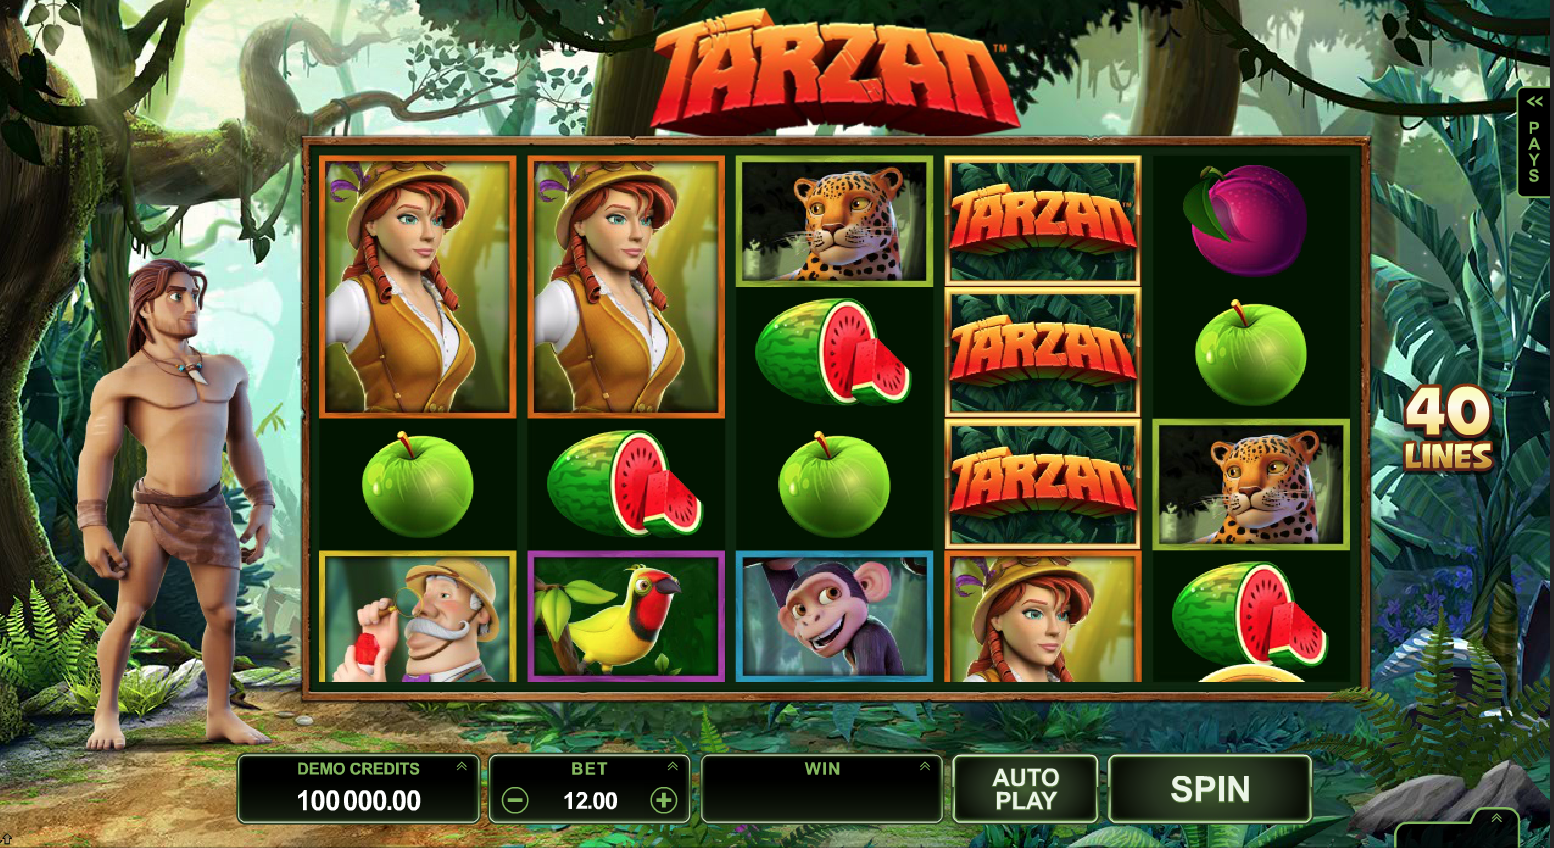 Microgaming To Release Tarzan Online Slots Games